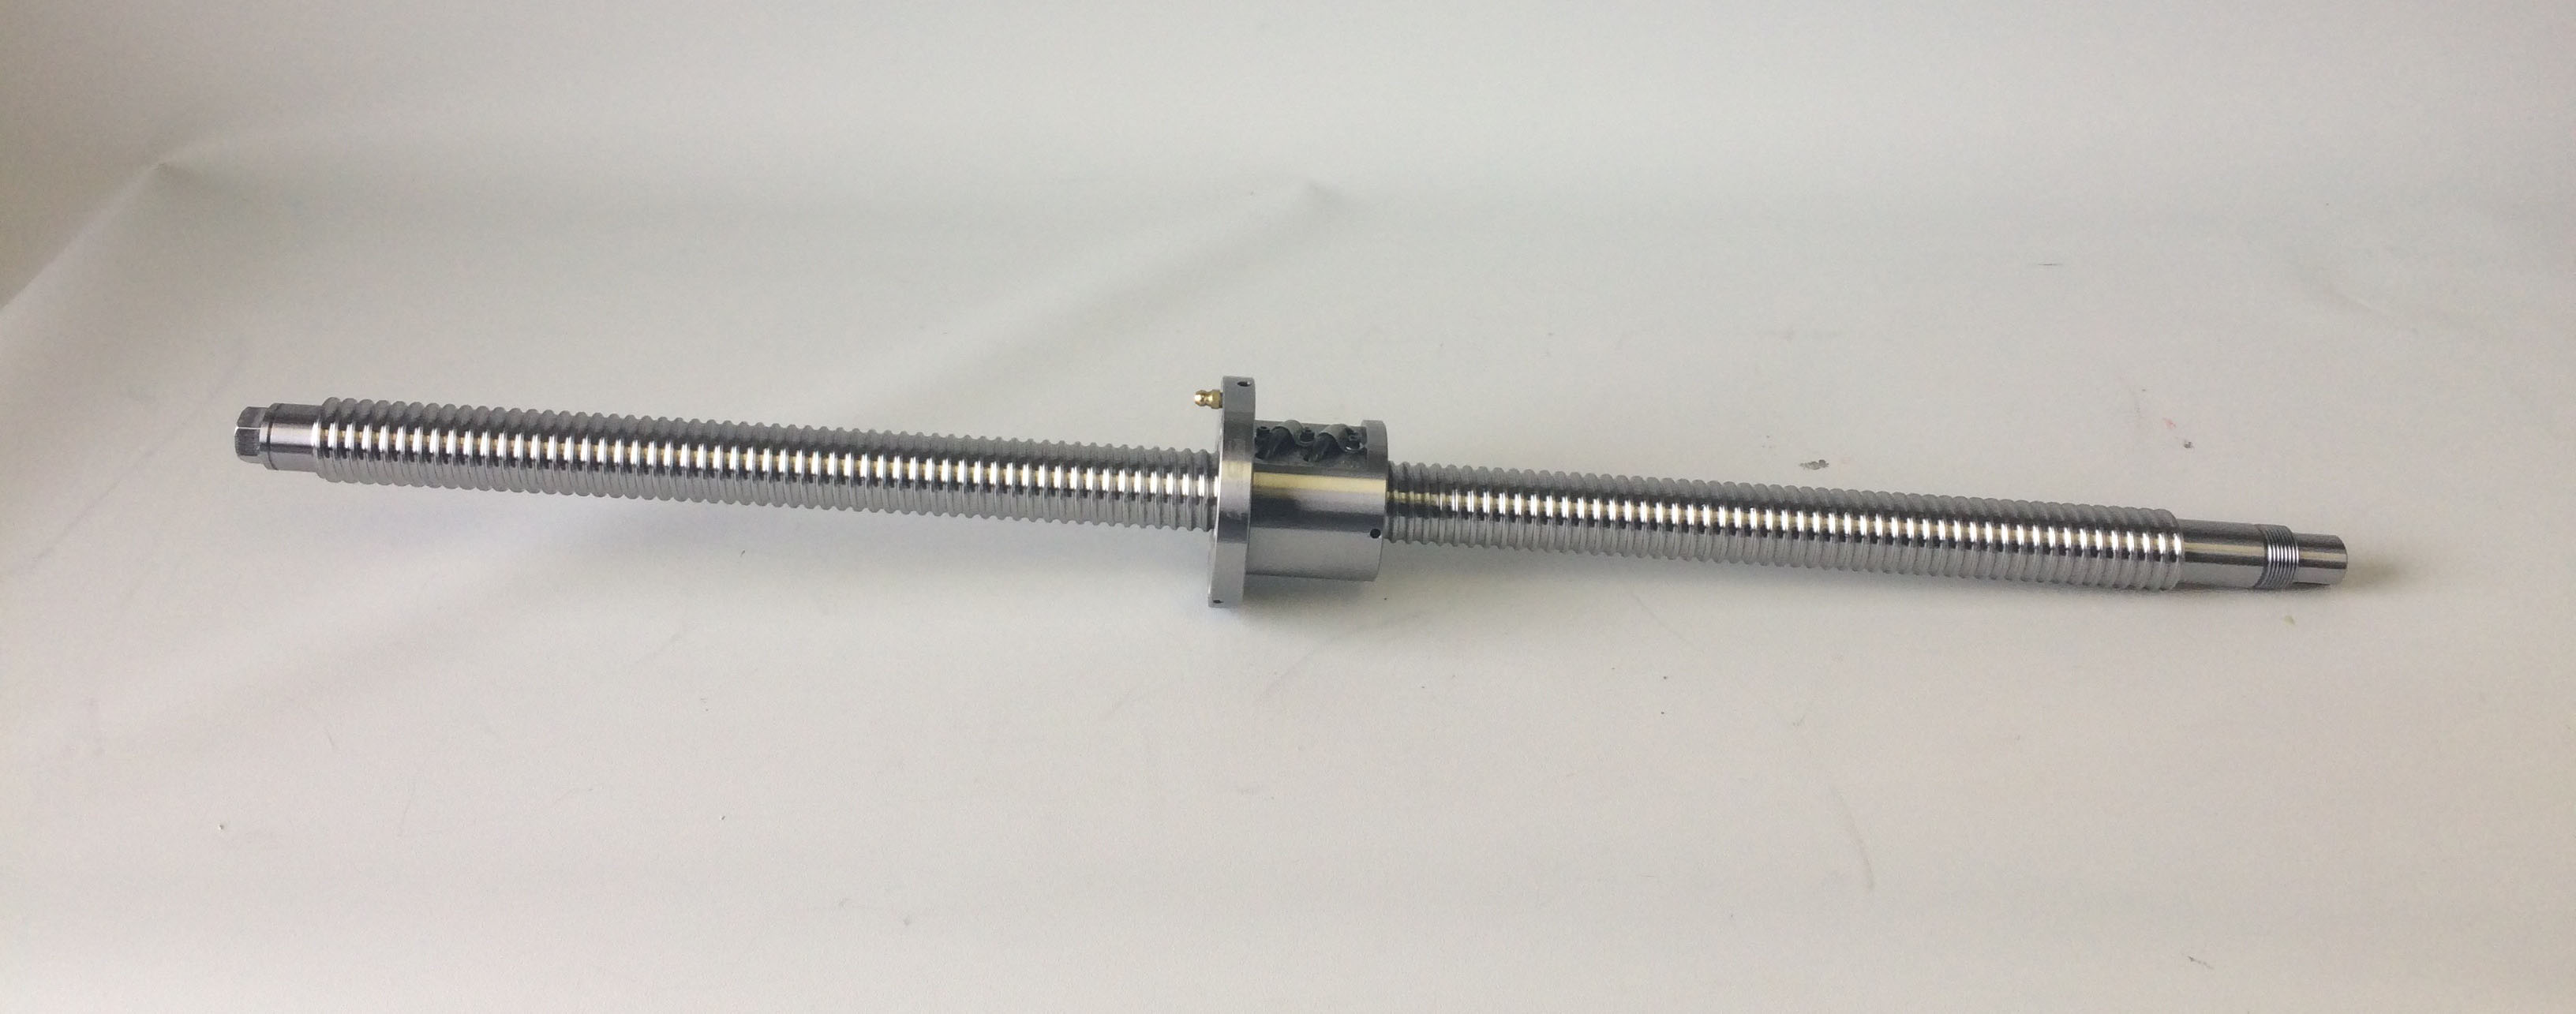 New Axcelis Linear Ball Nut and Lead Screw Assembly